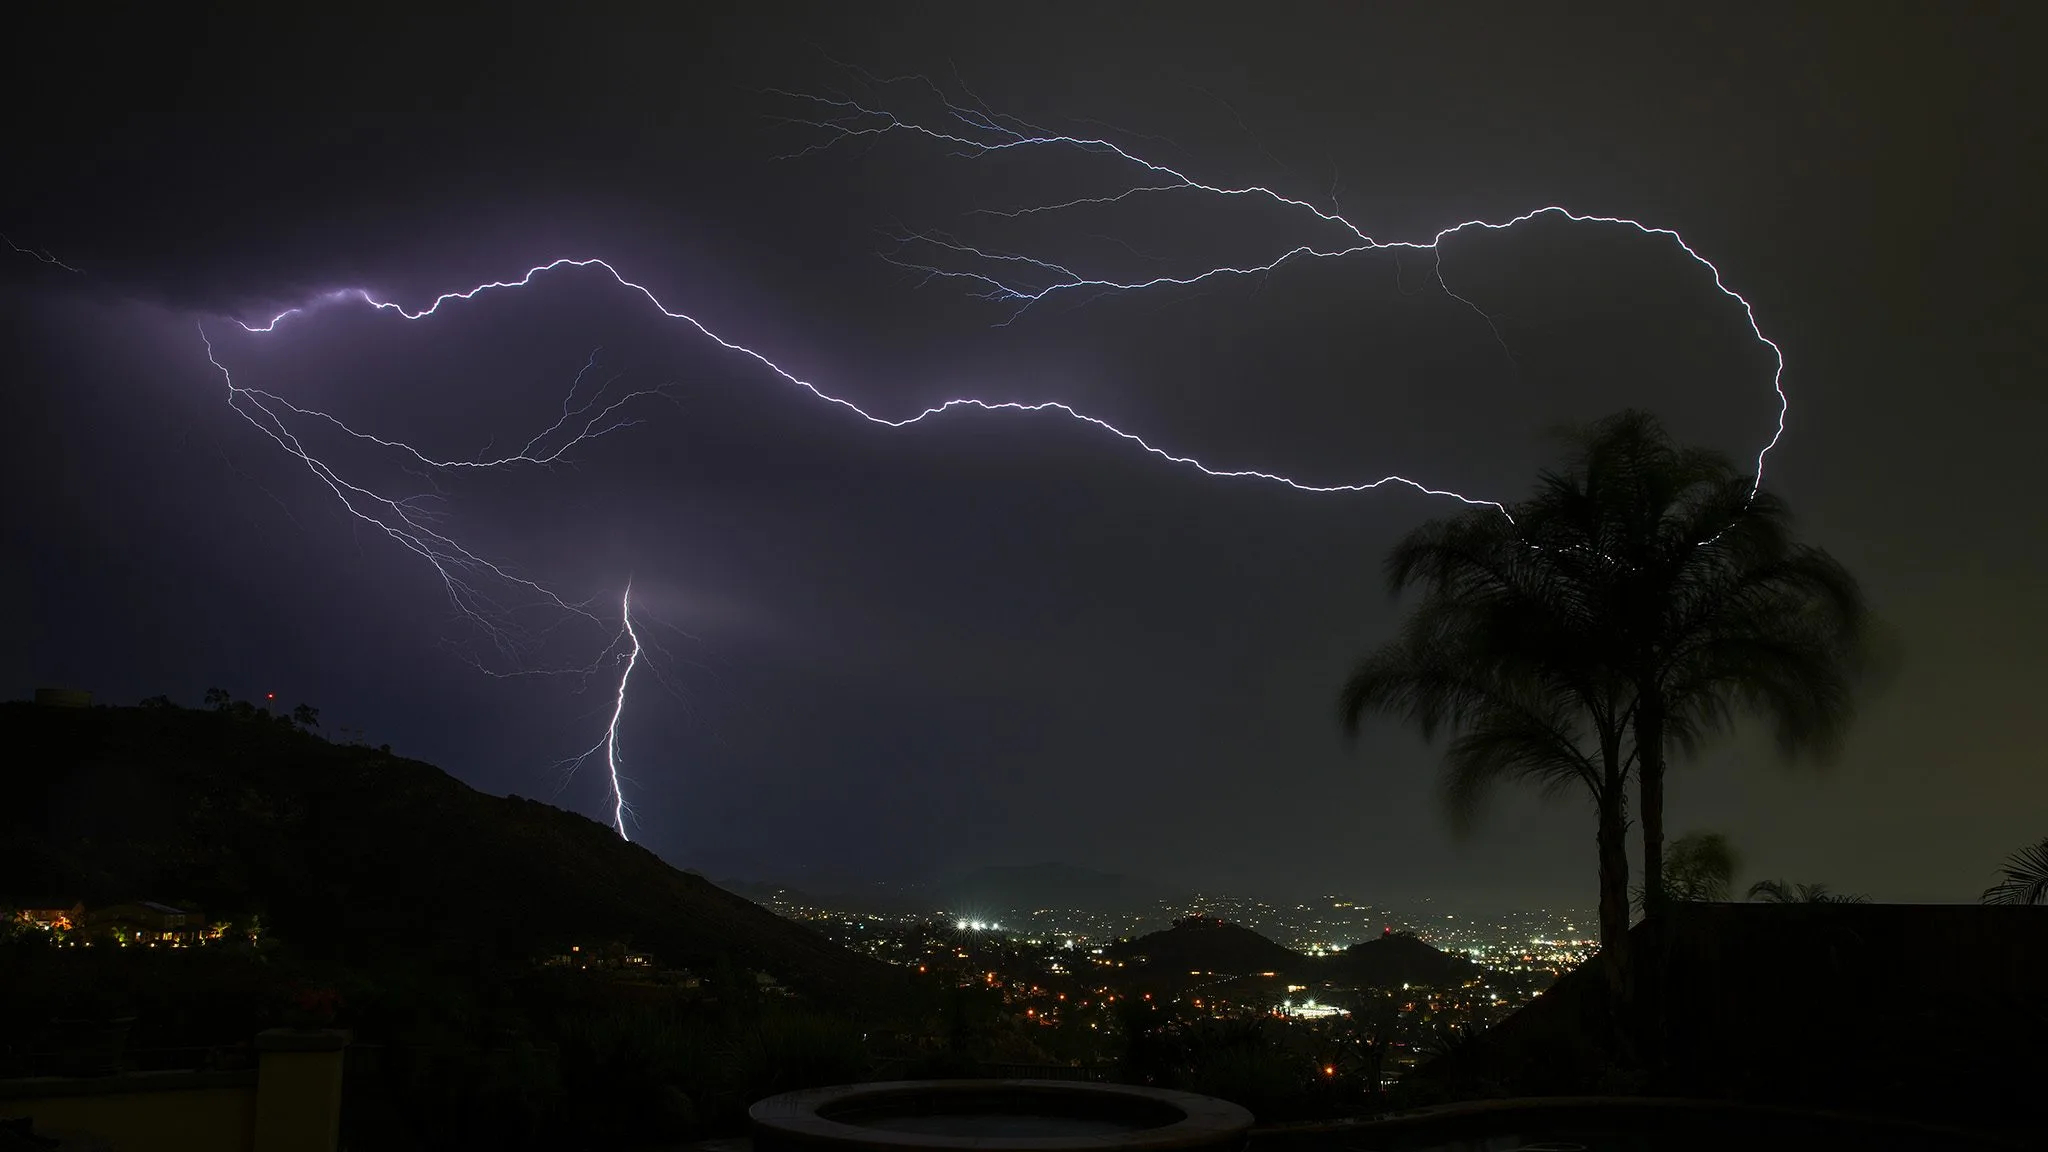 2048x1152 San Diego weather: These were your best photos from Monday's thunderstorm in San Dieg